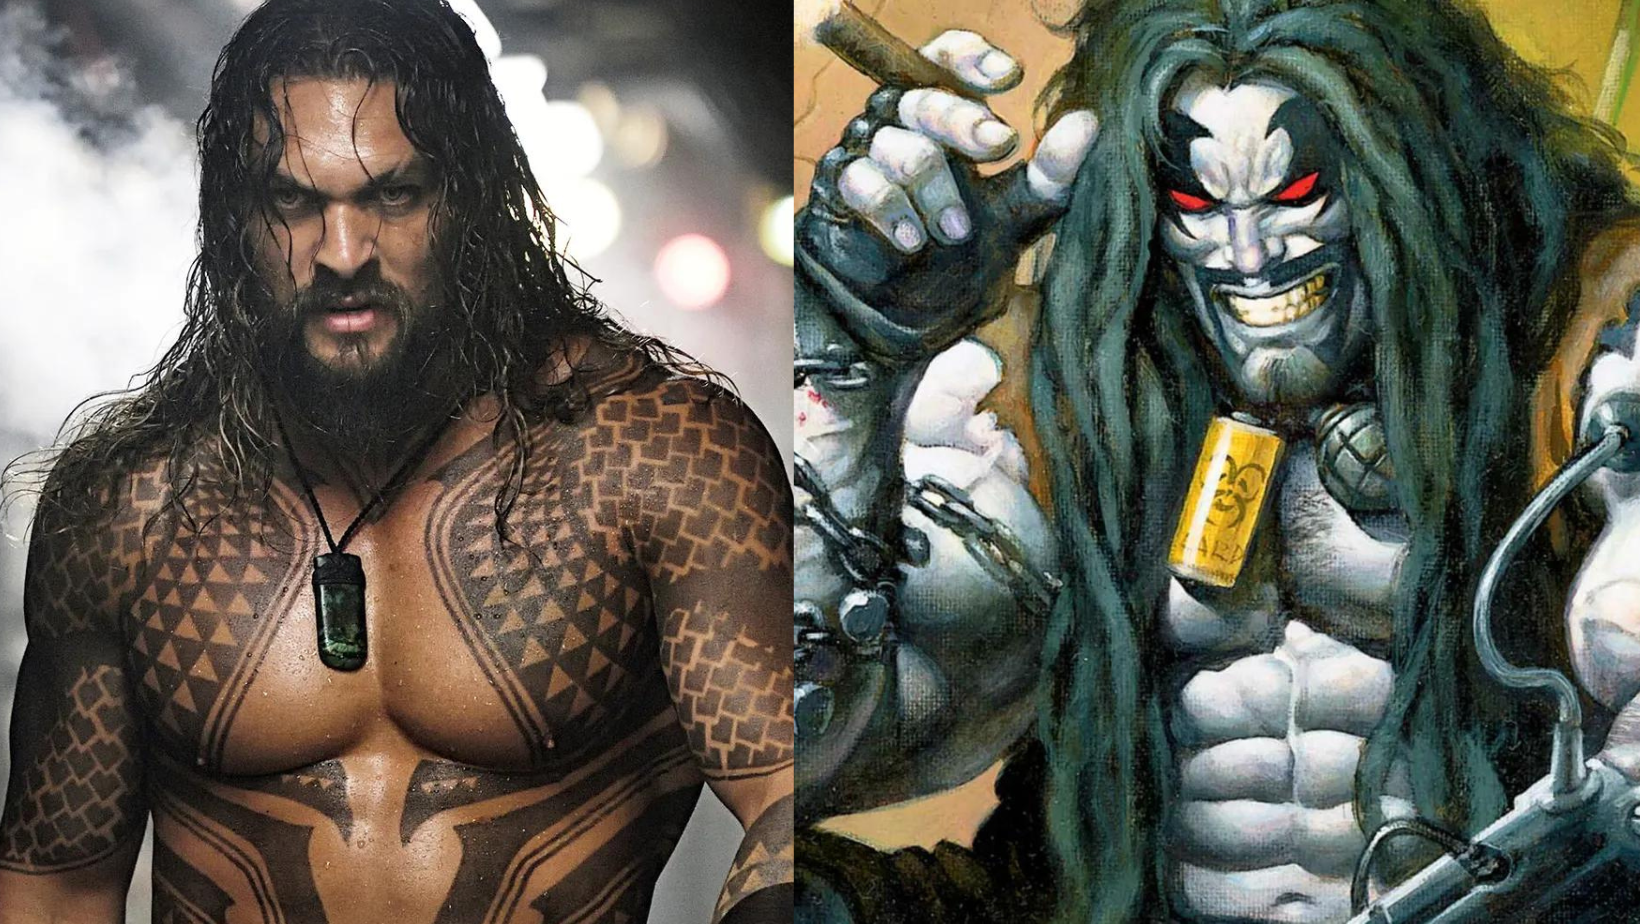 Jason Momoa To Play Lobo in ‘Superman: Legacy’ and Beyond According To Unexpected New Reports